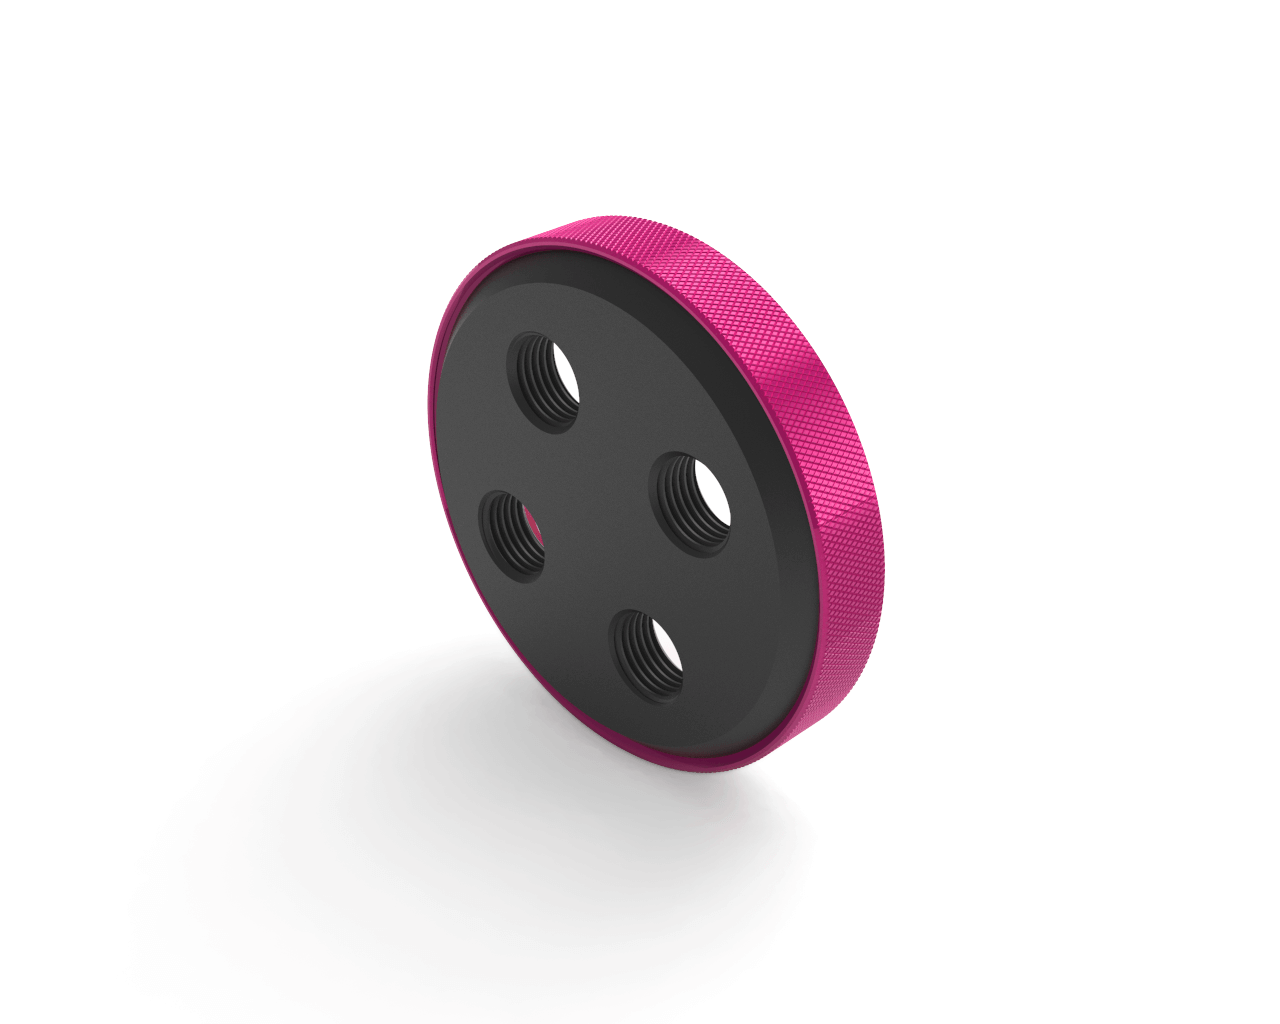 PrimoChill CTR Replacement SX Compression Ring - PrimoChill - KEEPING IT COOL Candy Pink